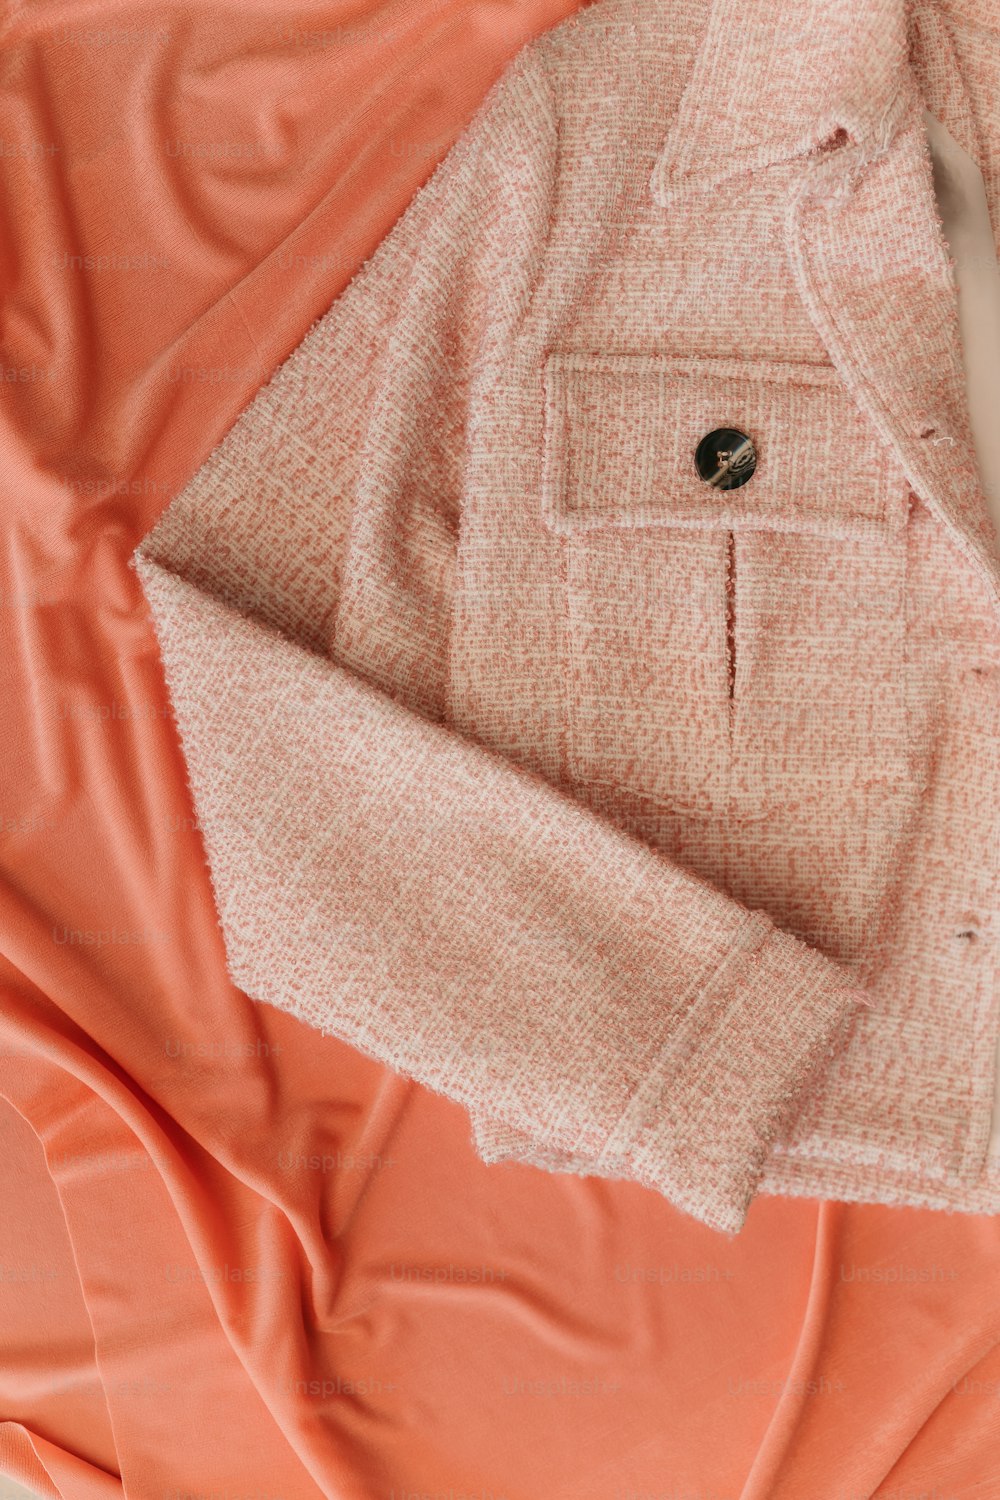 an orange and pink jacket laying on top of a bed